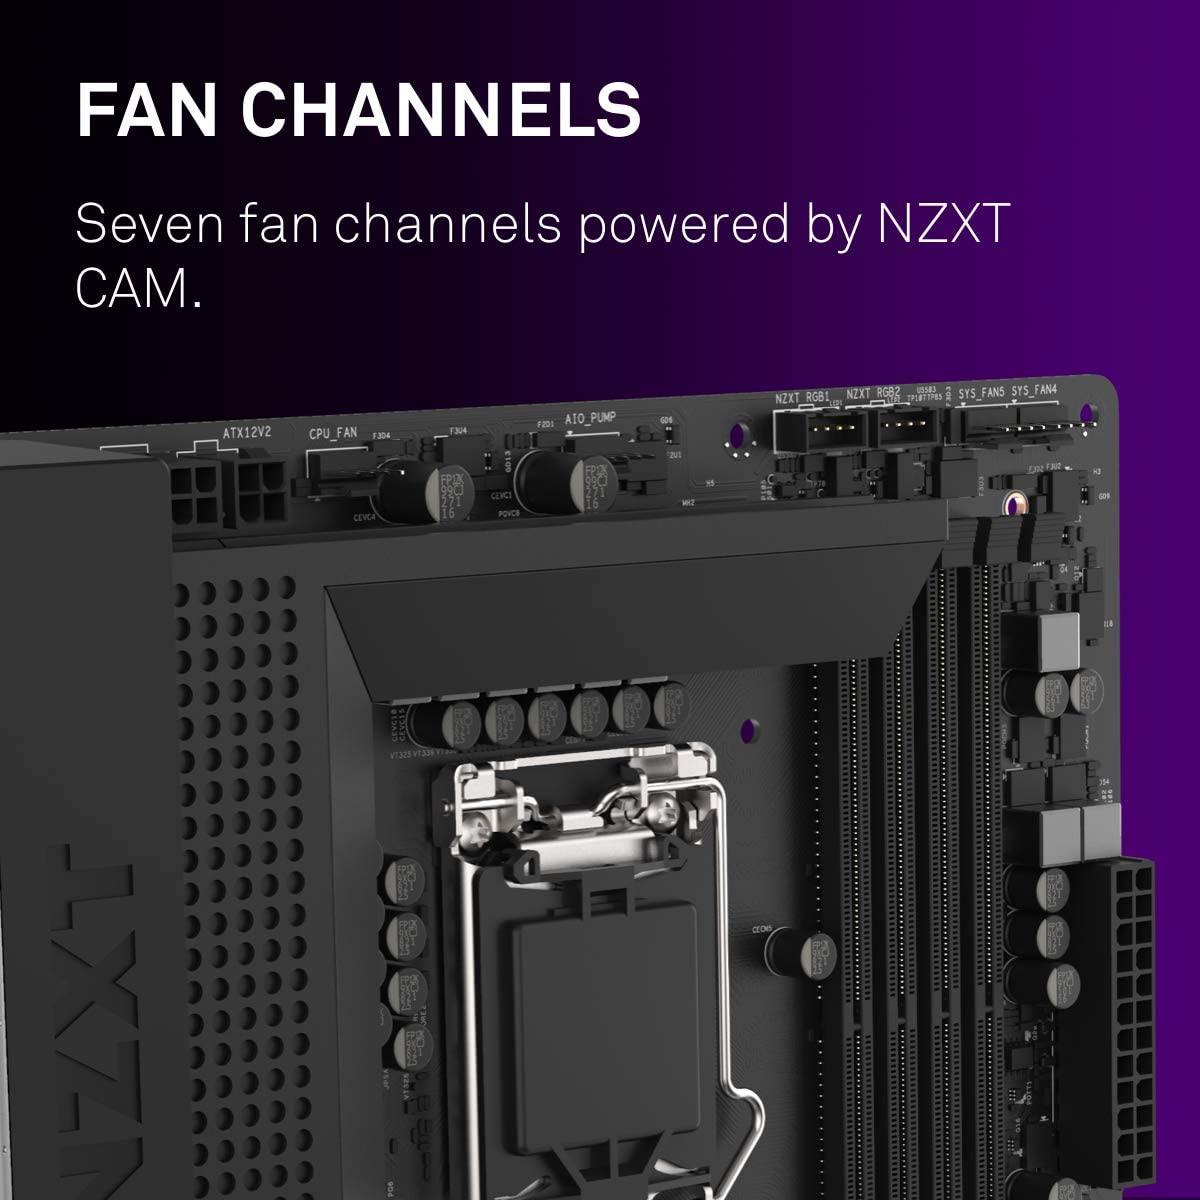 NZXT N7 Z490 - N7-Z49XT-B1 - Intel Z490 Chipset (Supports 10th Gen CPUs) - ATX Gaming Motherboard - Integrated I/O Shield - Intel Wireless-AX 200 - Bluetooth V5.1 - Black-Motherboard-dealsplant